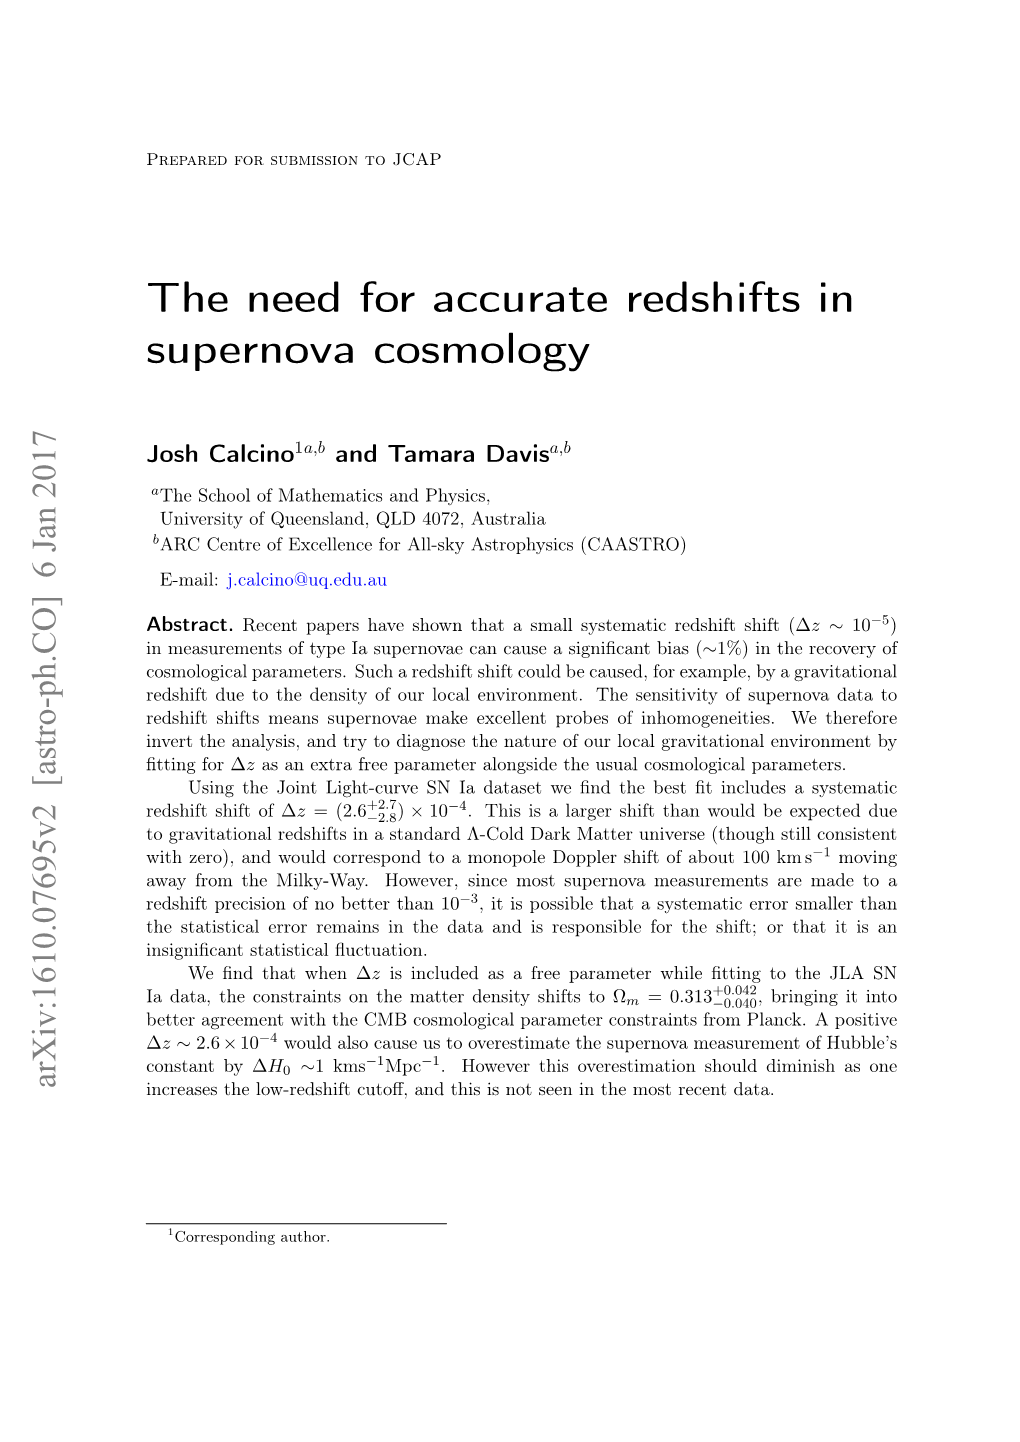 The Need for Accurate Redshifts in Supernova Cosmology